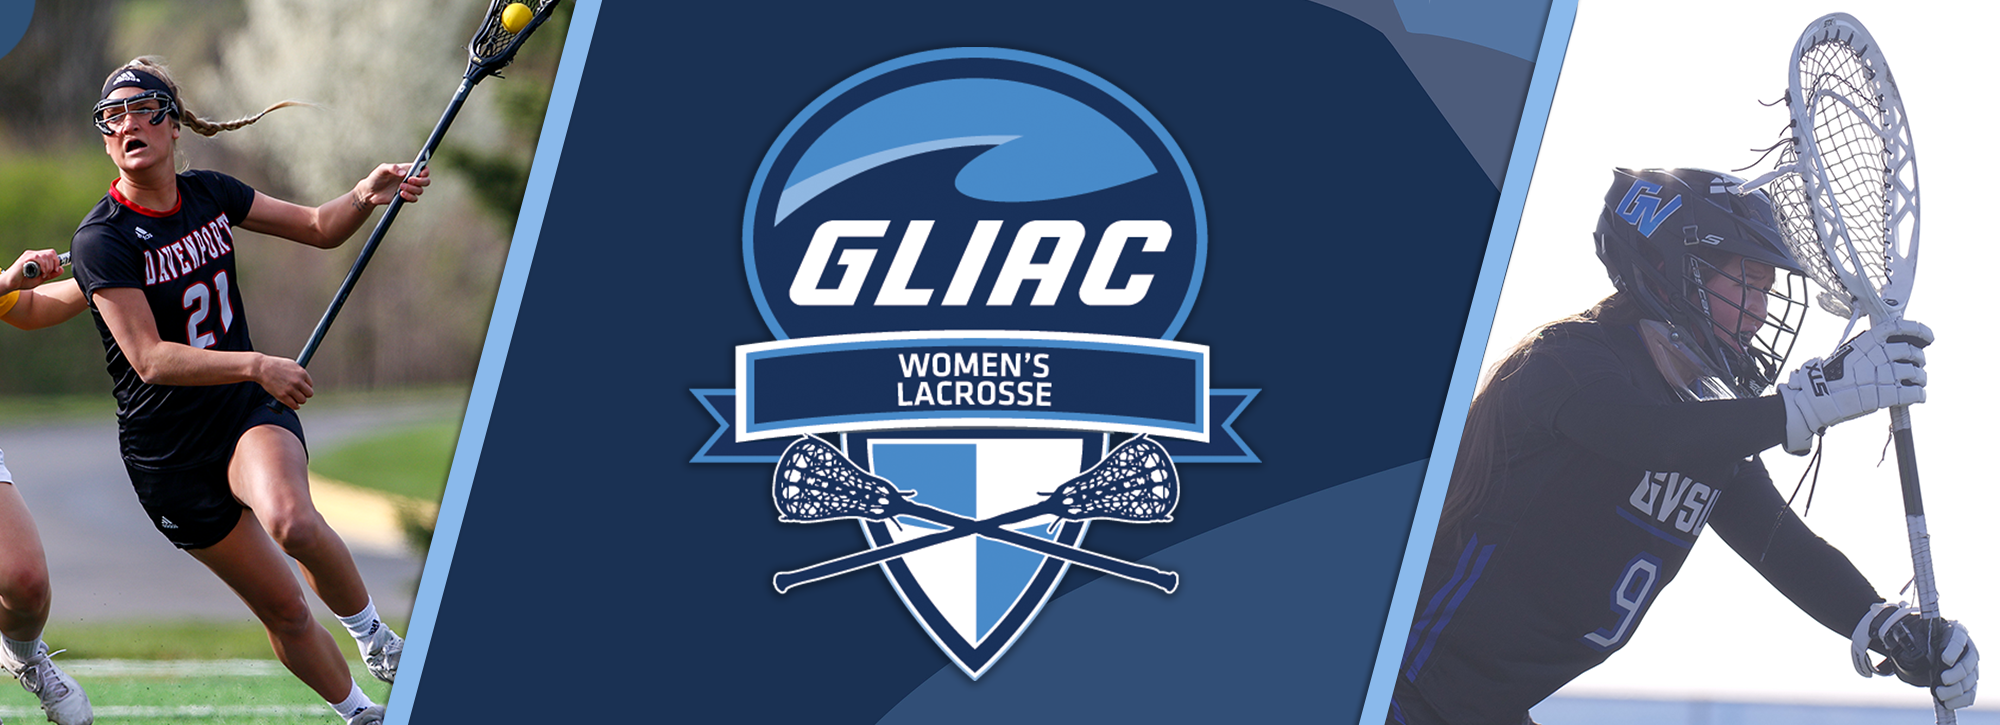 Davenport's Miller, Grand Valley State's Maloney Earn Women's Lacrosse Weekly Honors